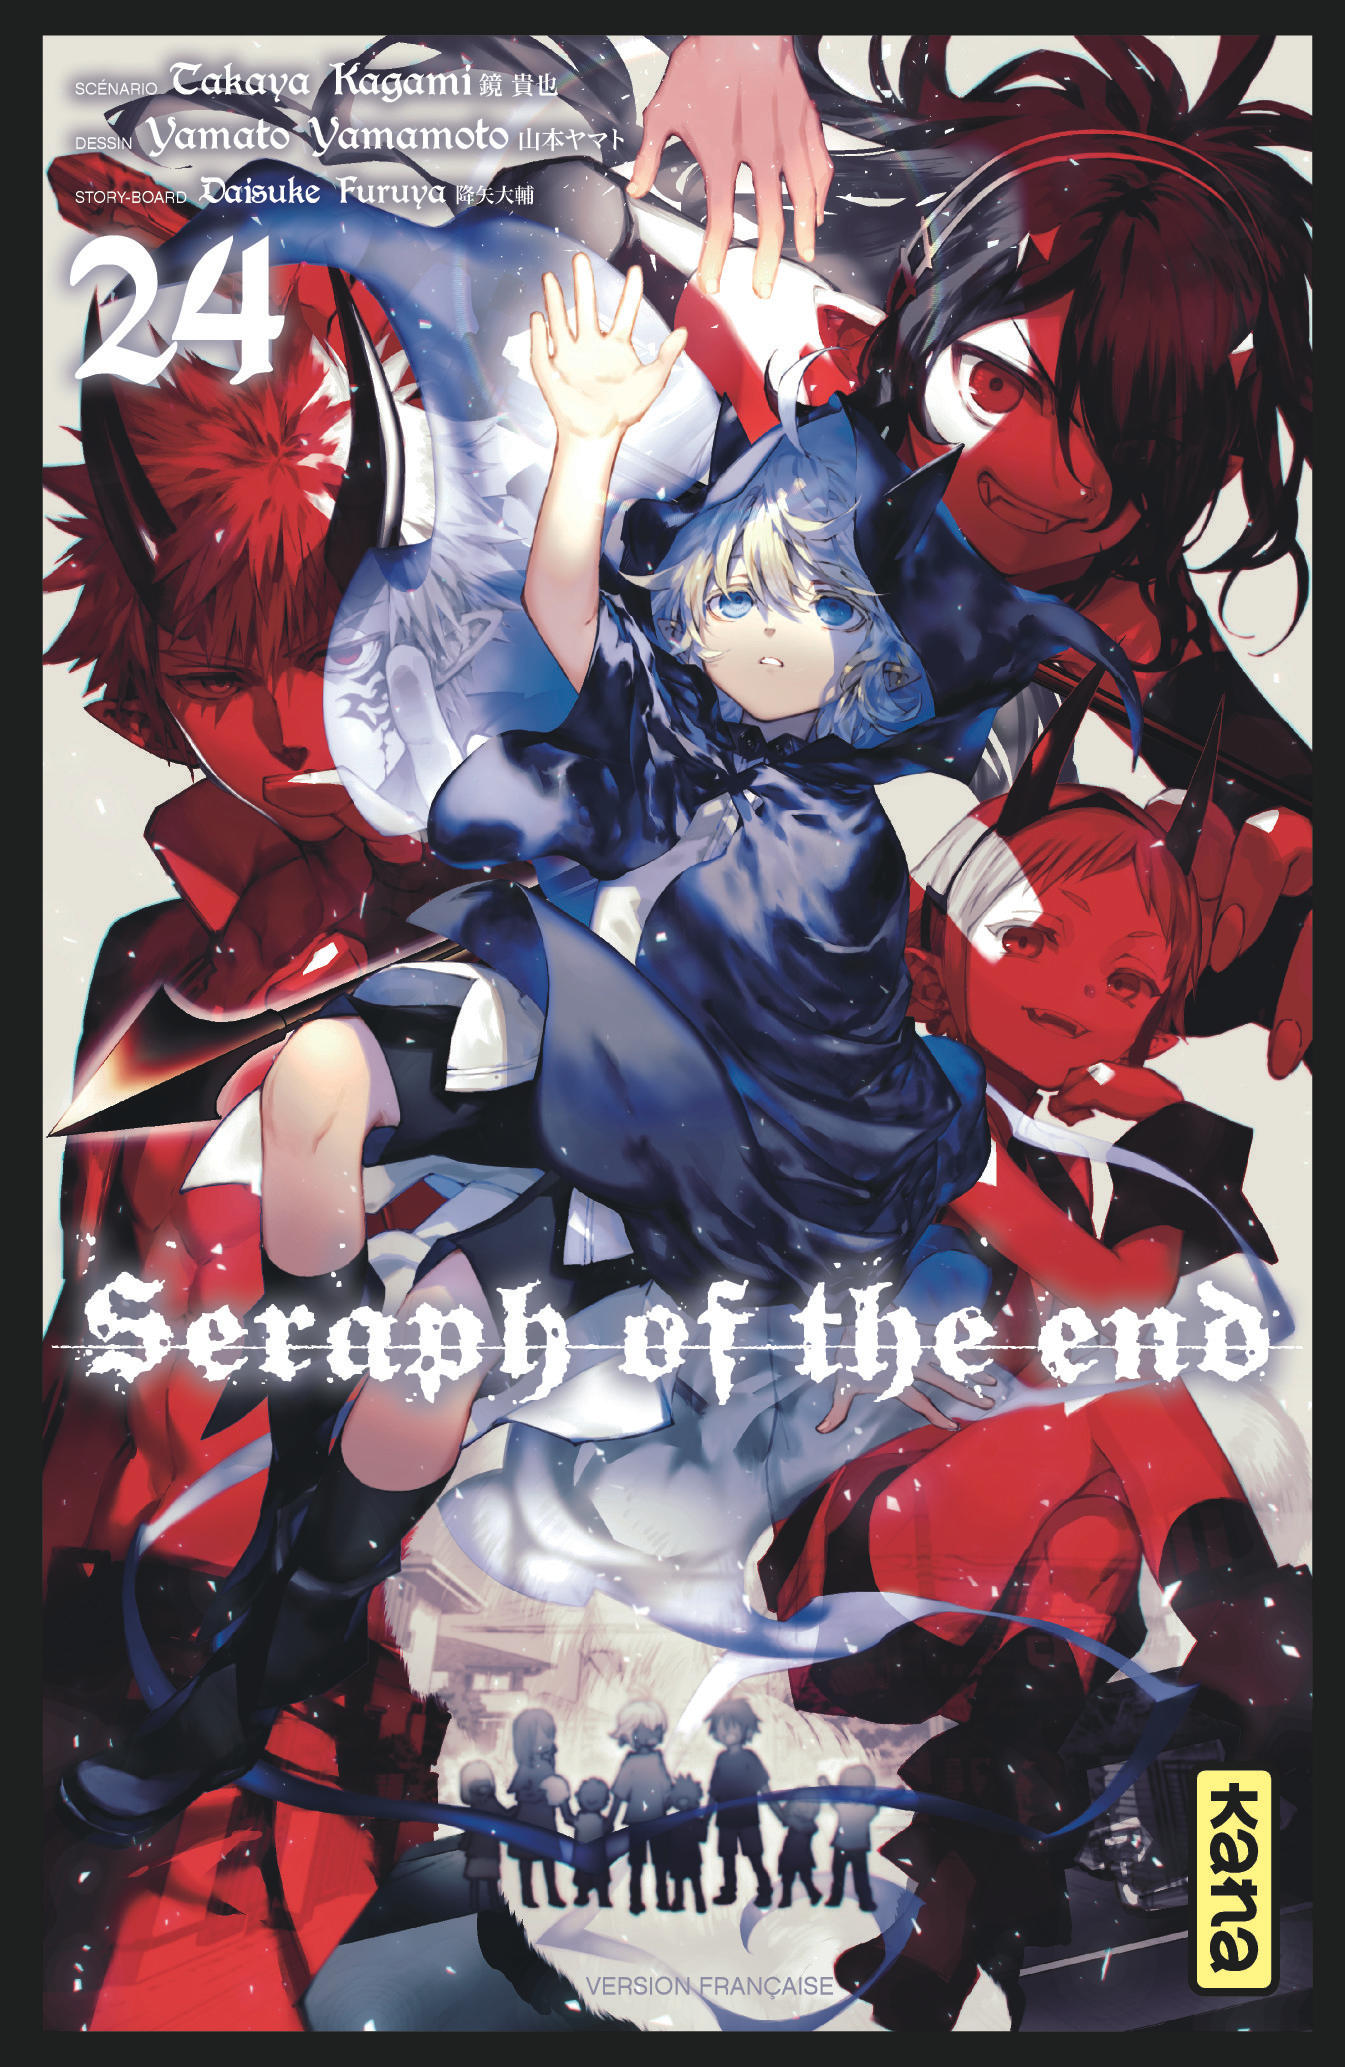 Seraph of the end – Tome 24 - couv